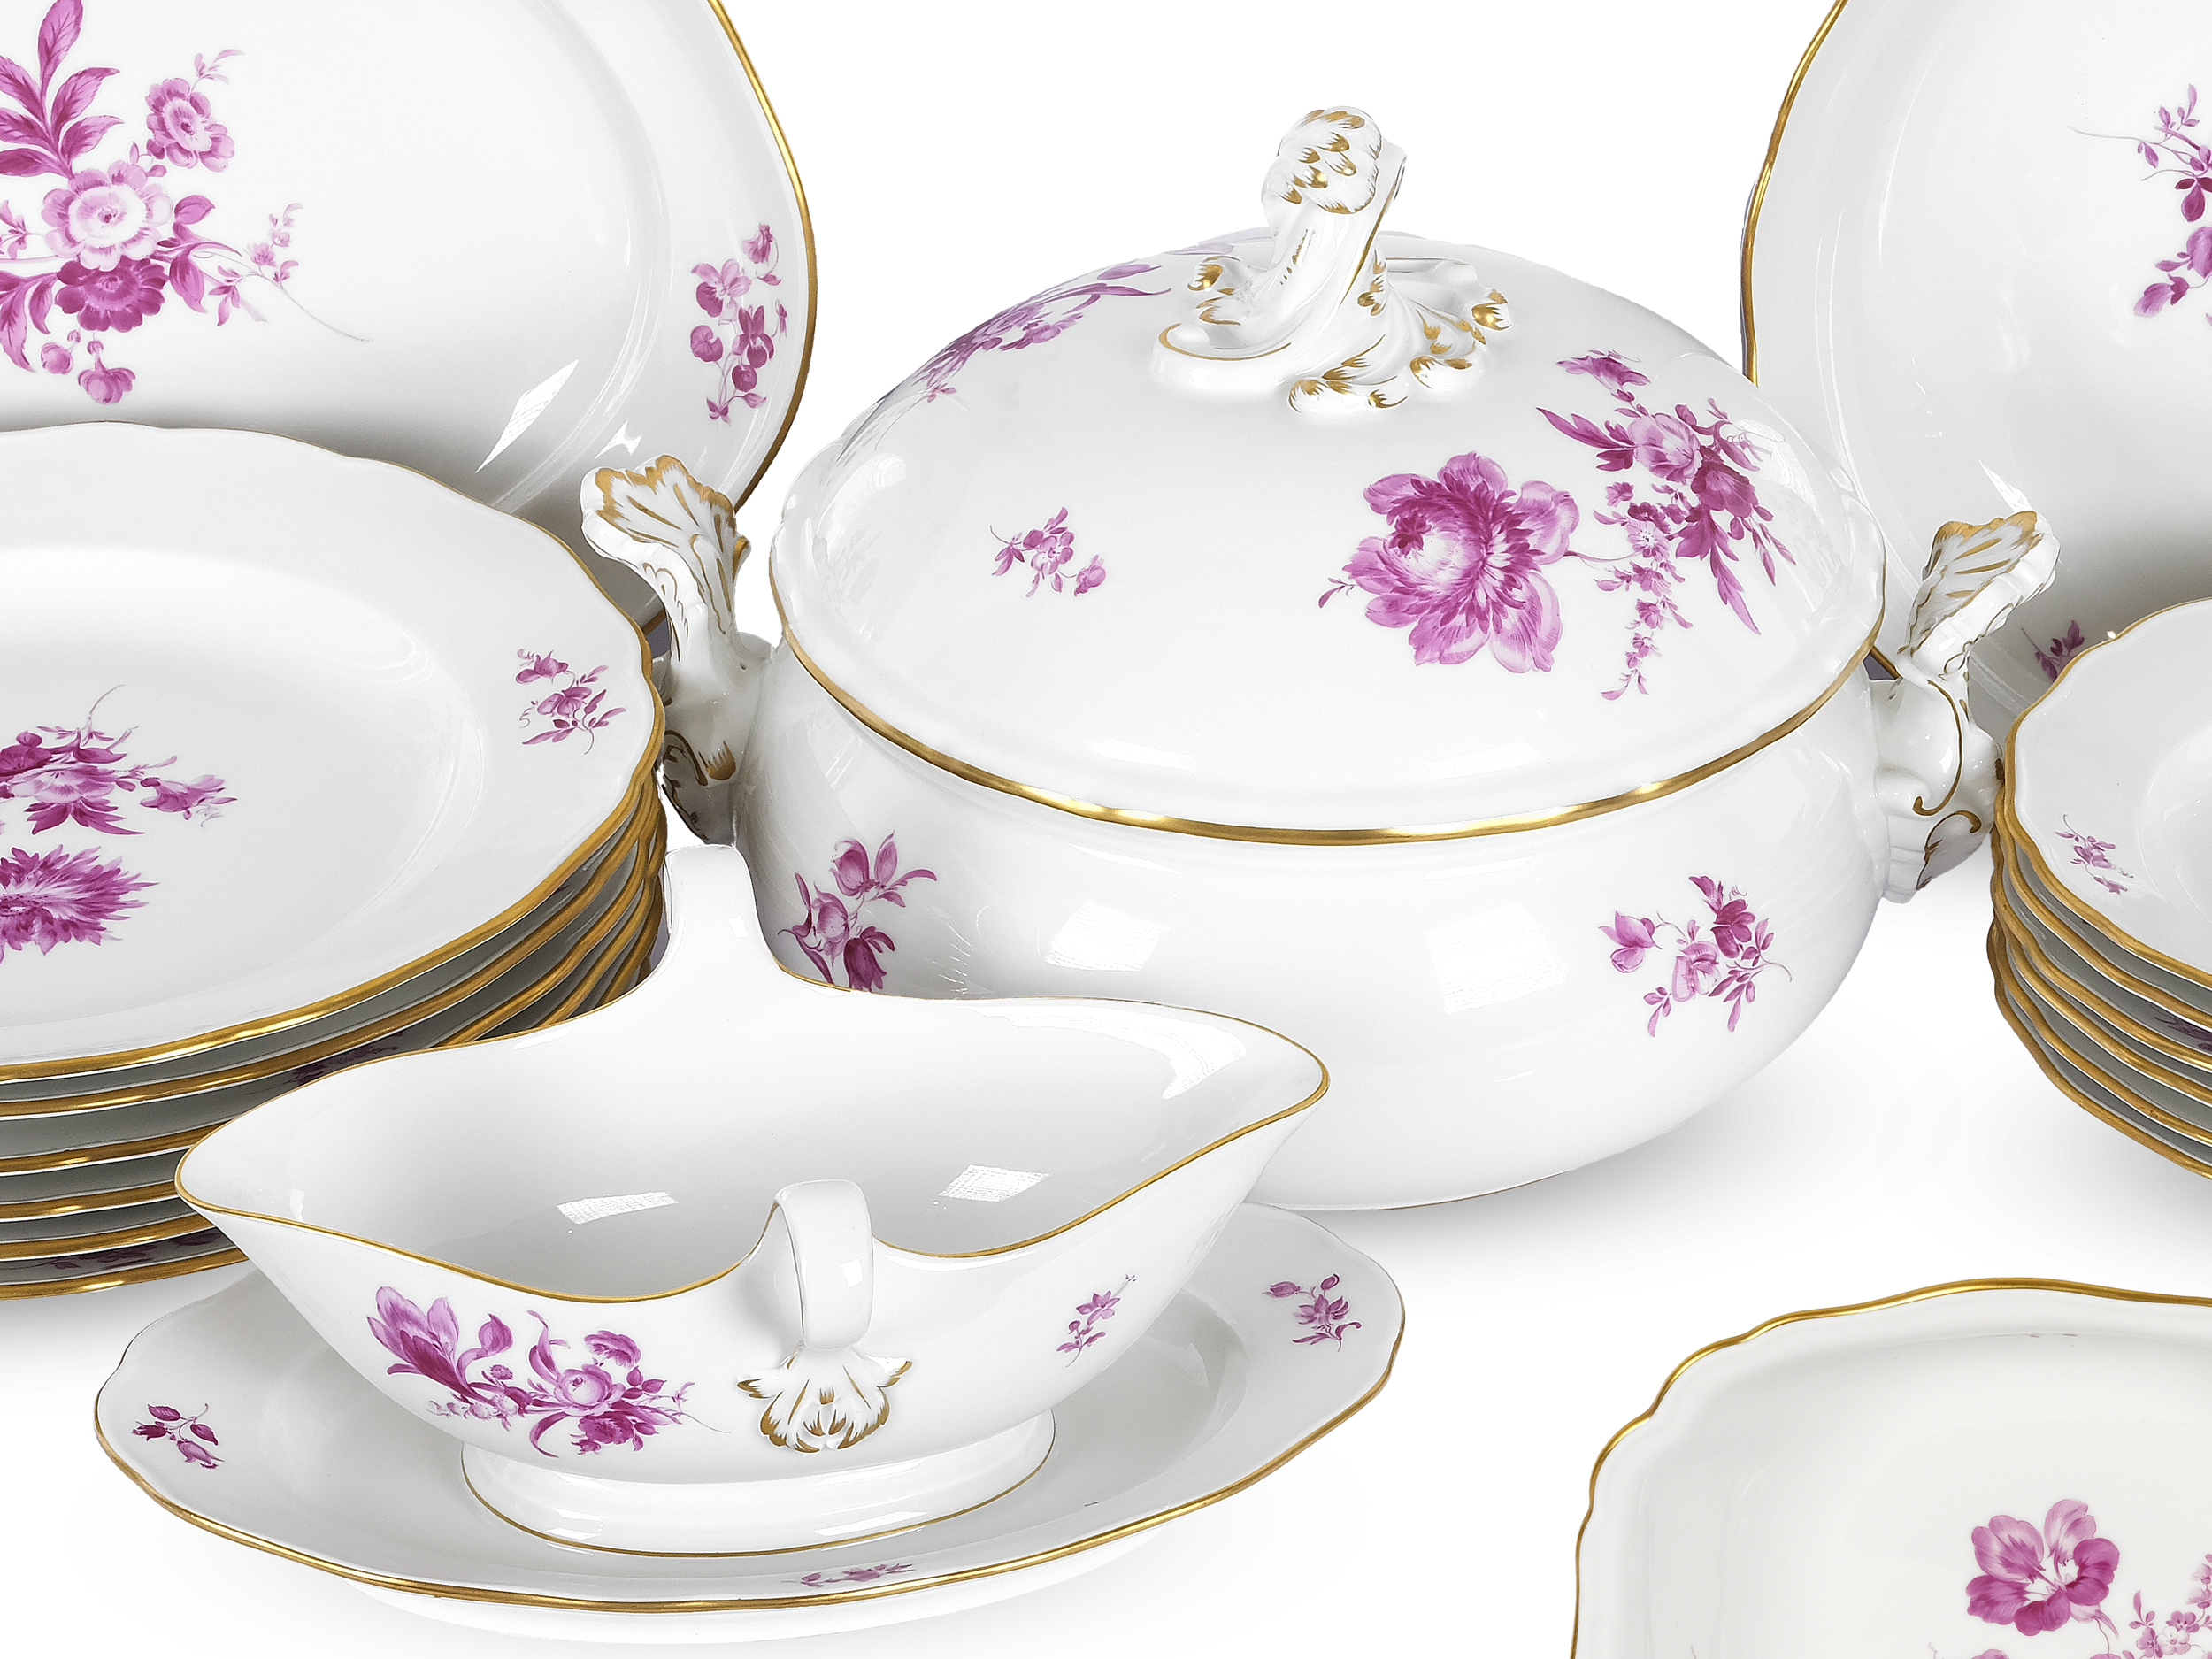 Dinner service for 6 persons, 24-piece, Violet foral decor, Meissen - Image 2 of 7